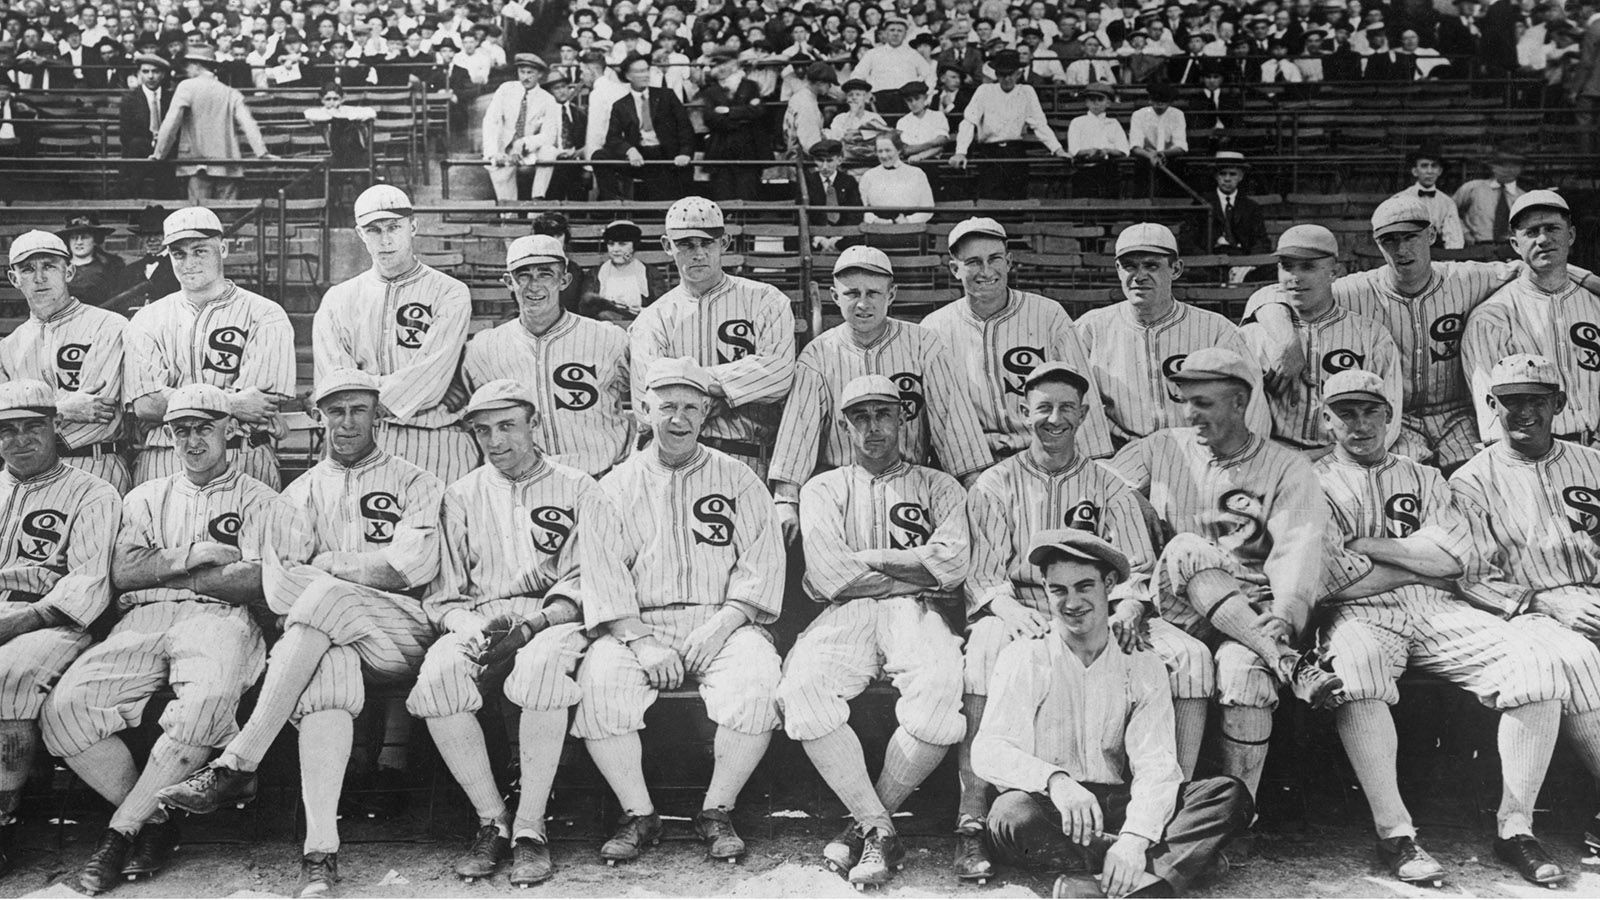 The 1919 Chicago White Sox